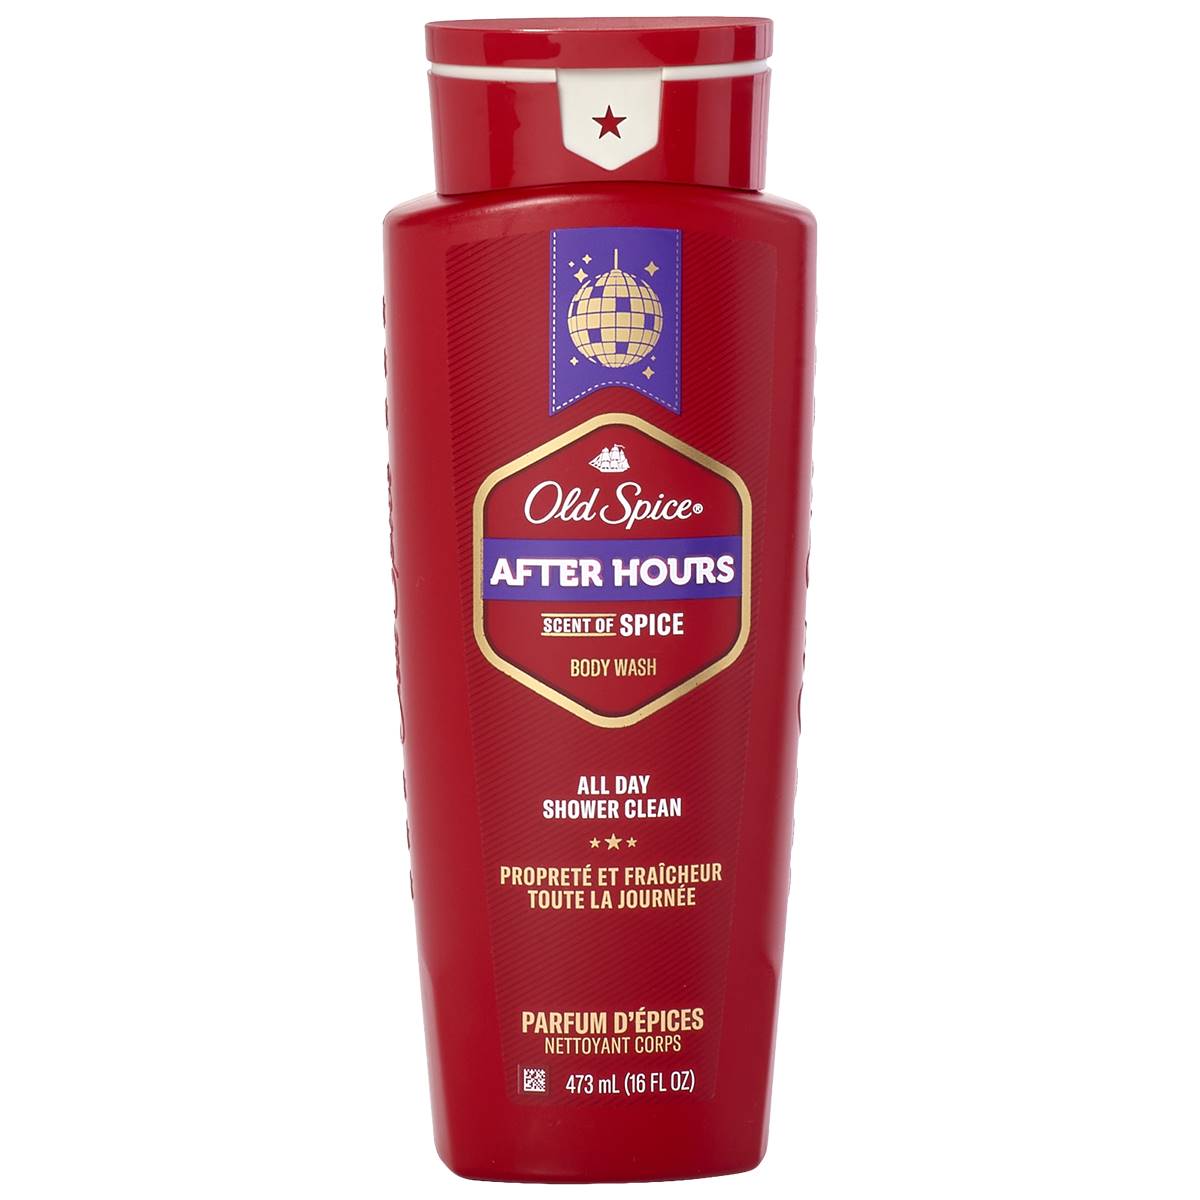 Old Spice 16 Oz. After Hours Body Wash